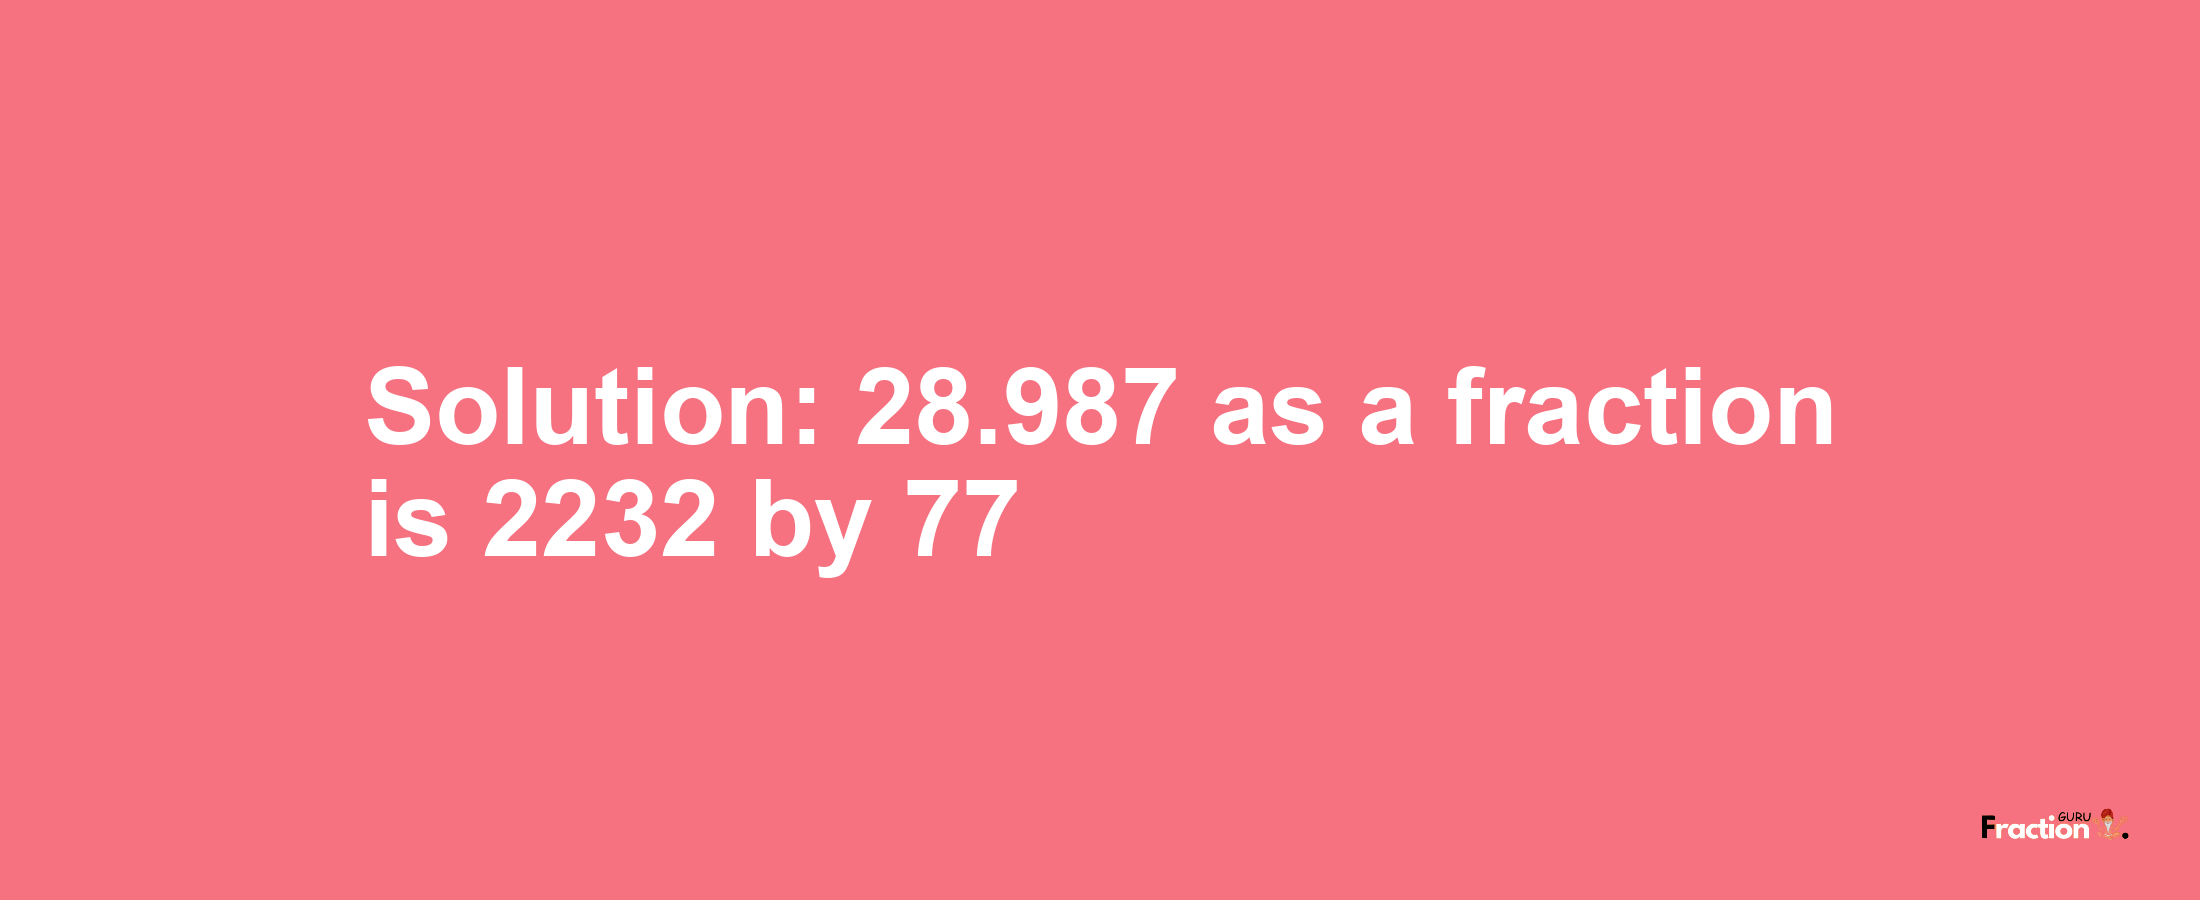 Solution:28.987 as a fraction is 2232/77